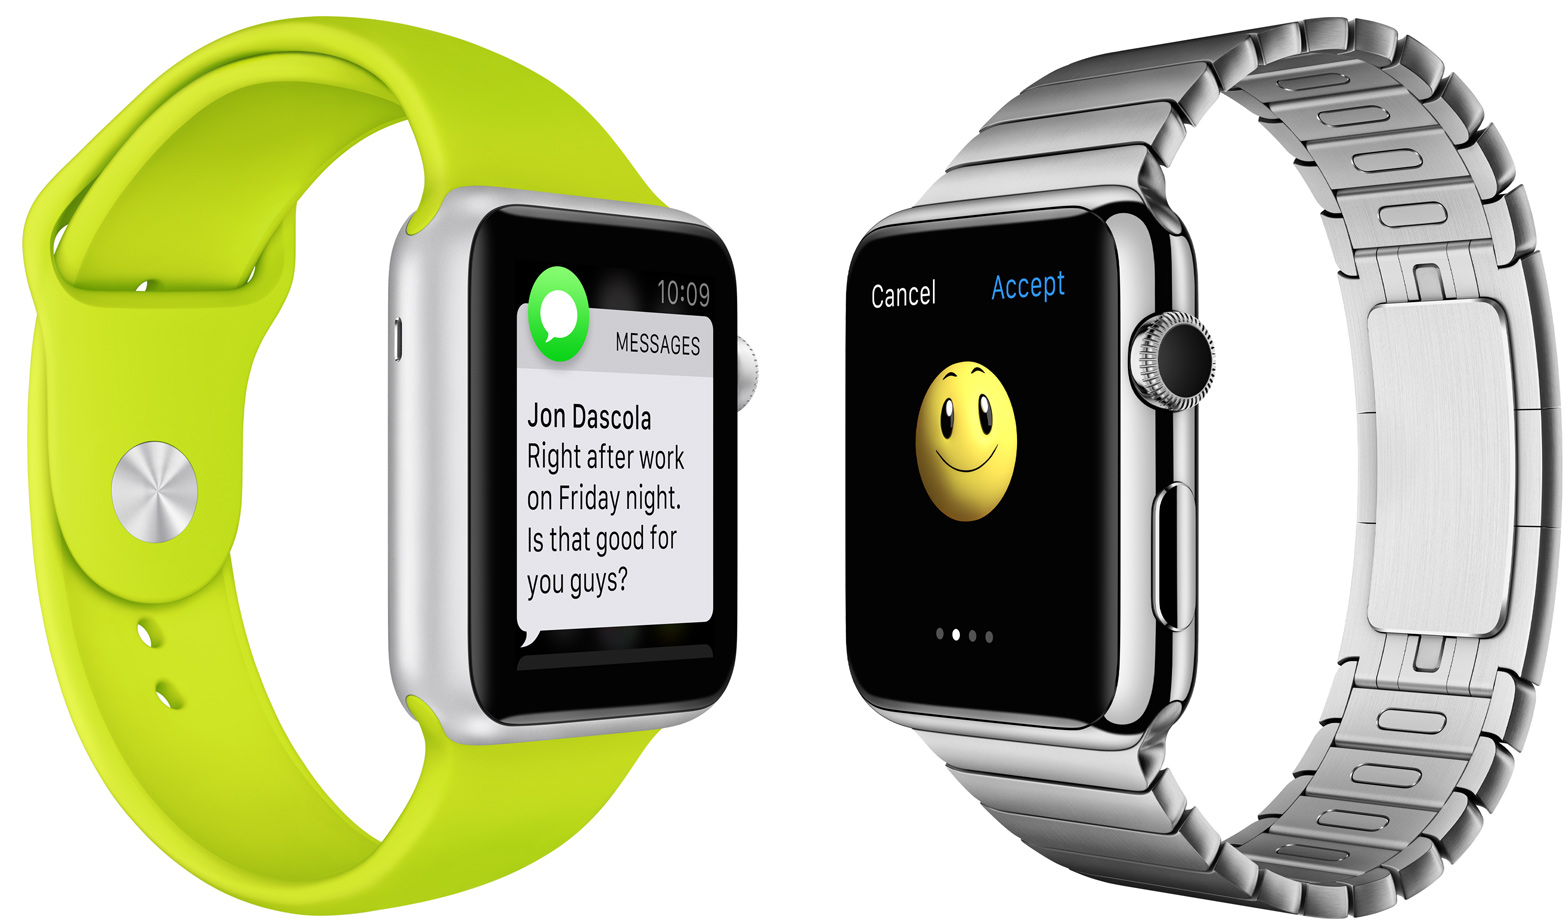 Can an Apple iWatch be purchased?